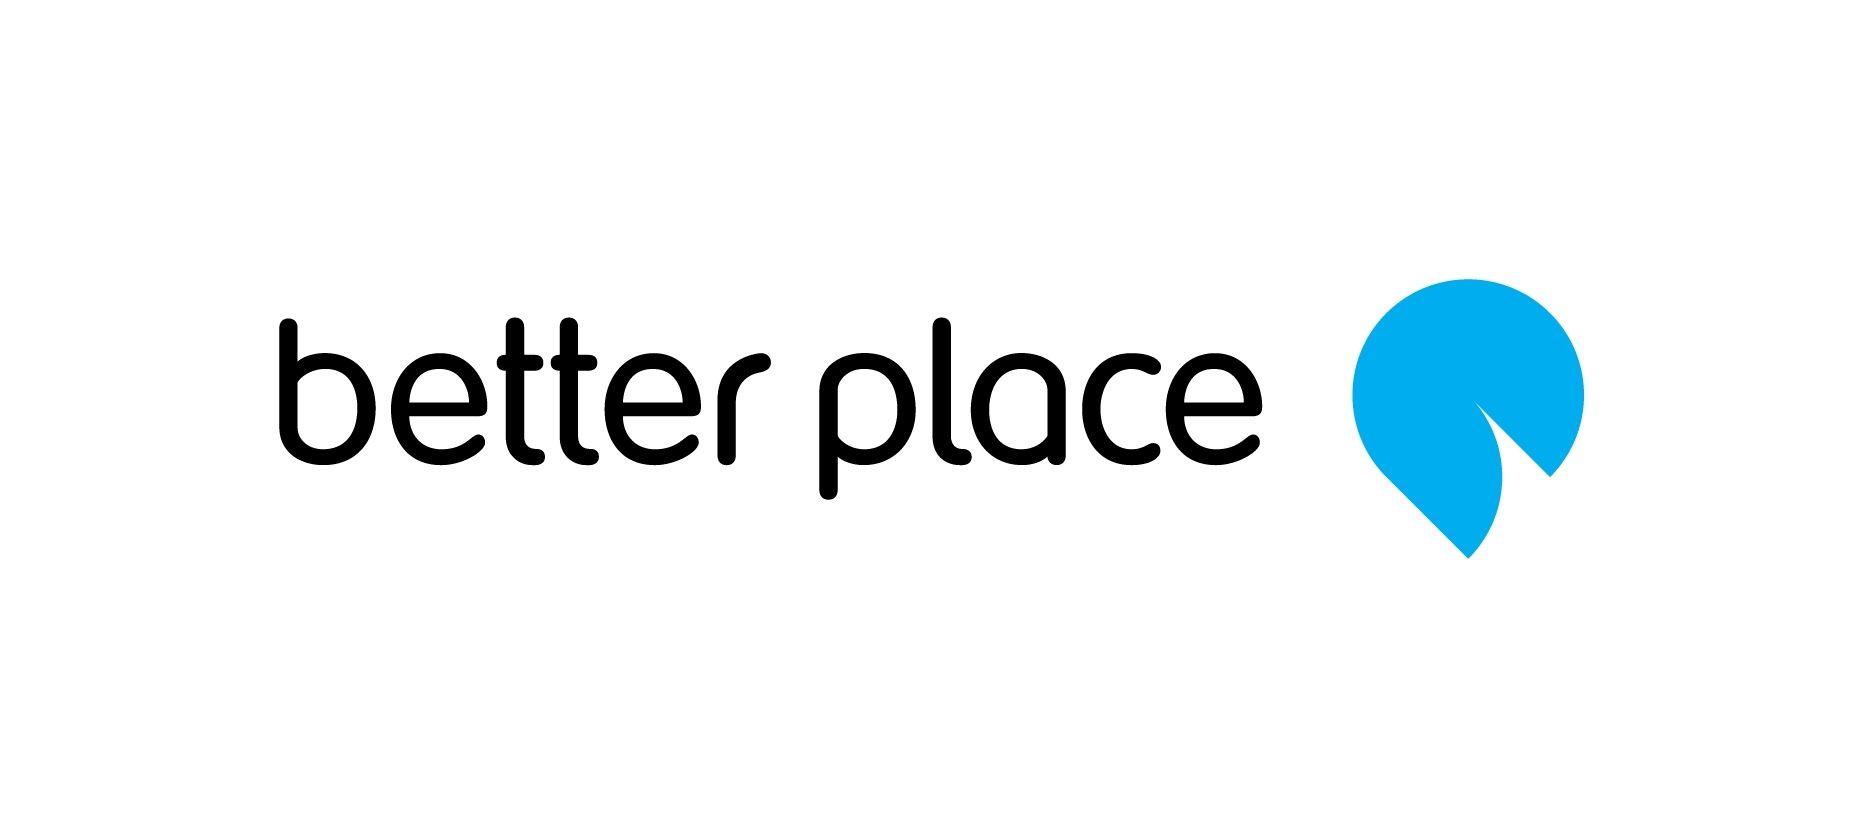 Place Logo - Looking for a font similar to the one used in the better place logo